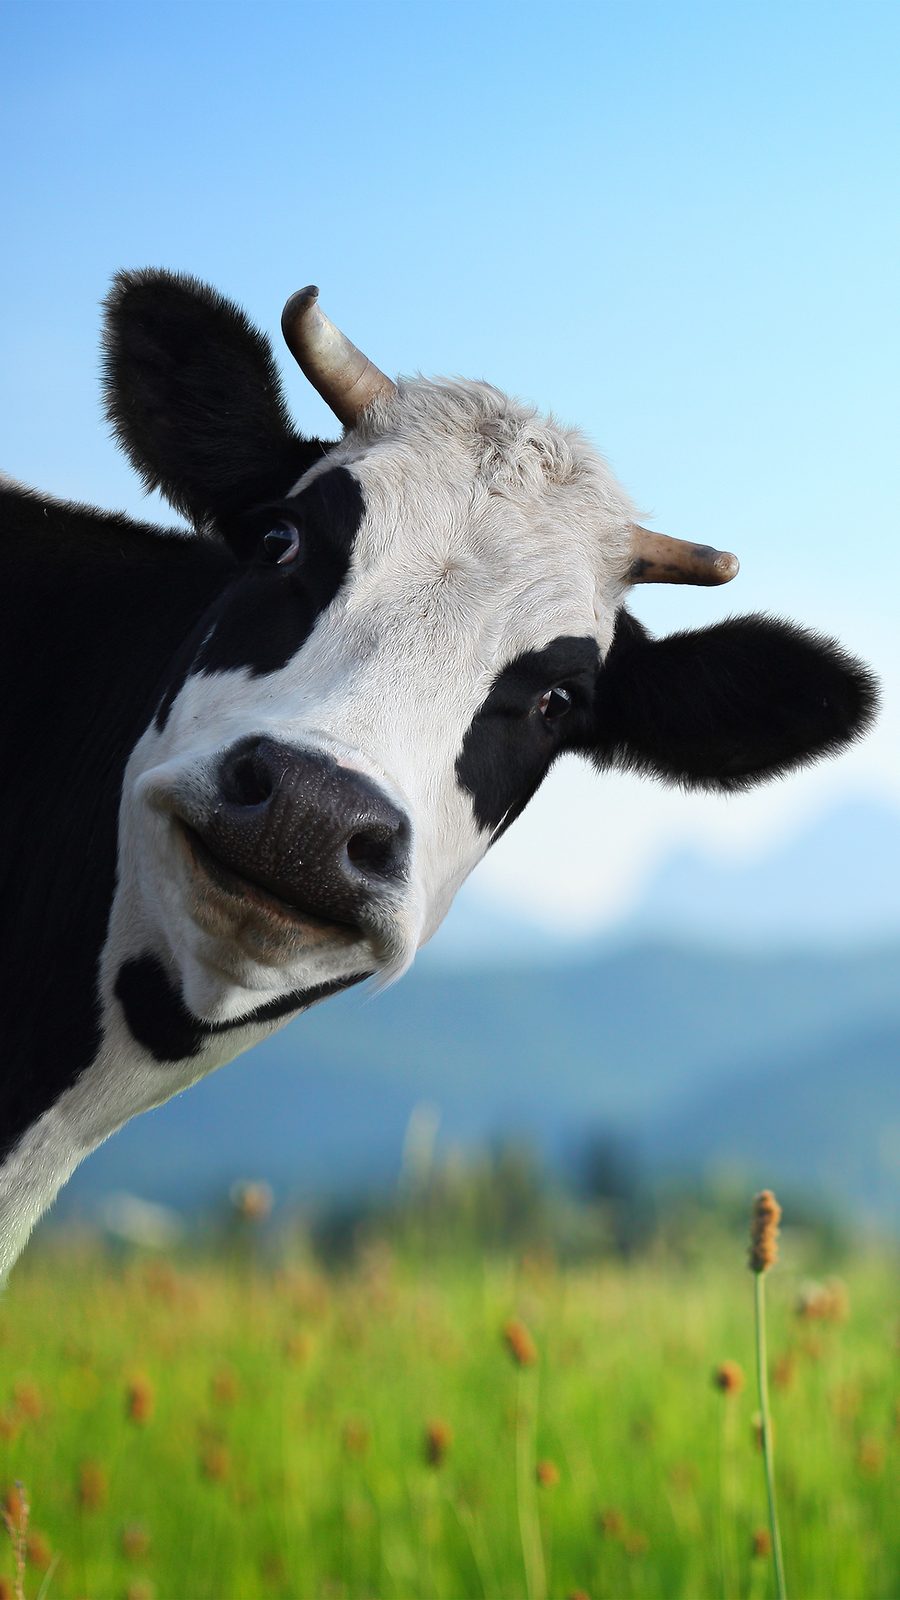 https://fillyourplate.org/blog/wp-content/uploads/2015/07/bigstock-Head-of-funny-cow-looking-to-a-48484160-900x1600.jpg